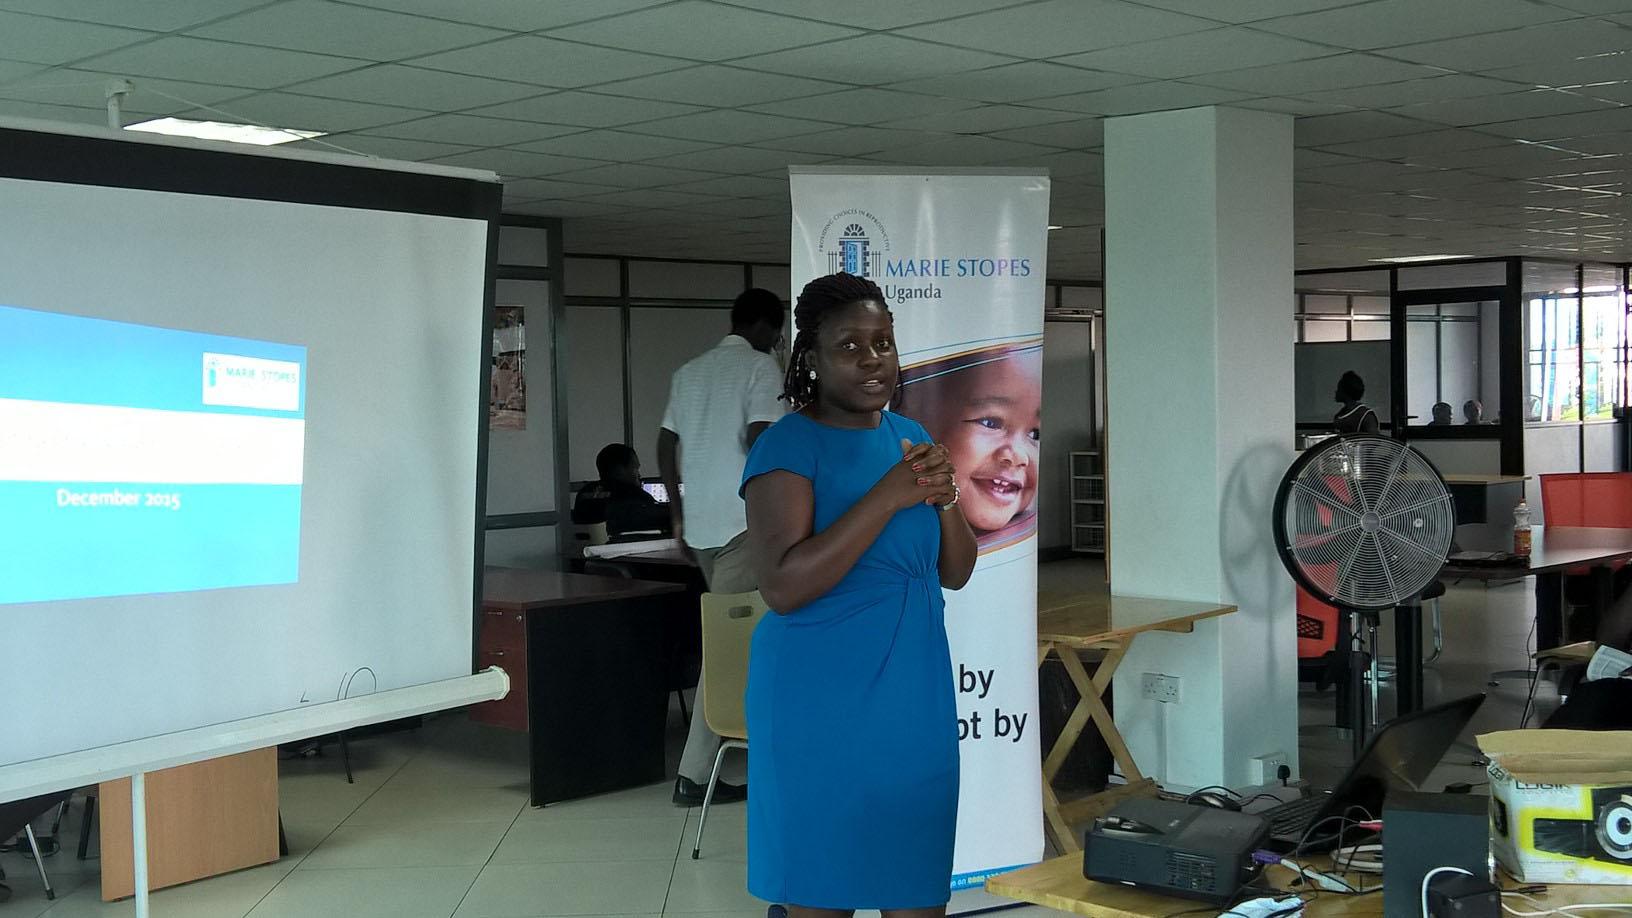 Hive Colab Director, Barbra Birungi welcoming guests at the launch of the Challenge.